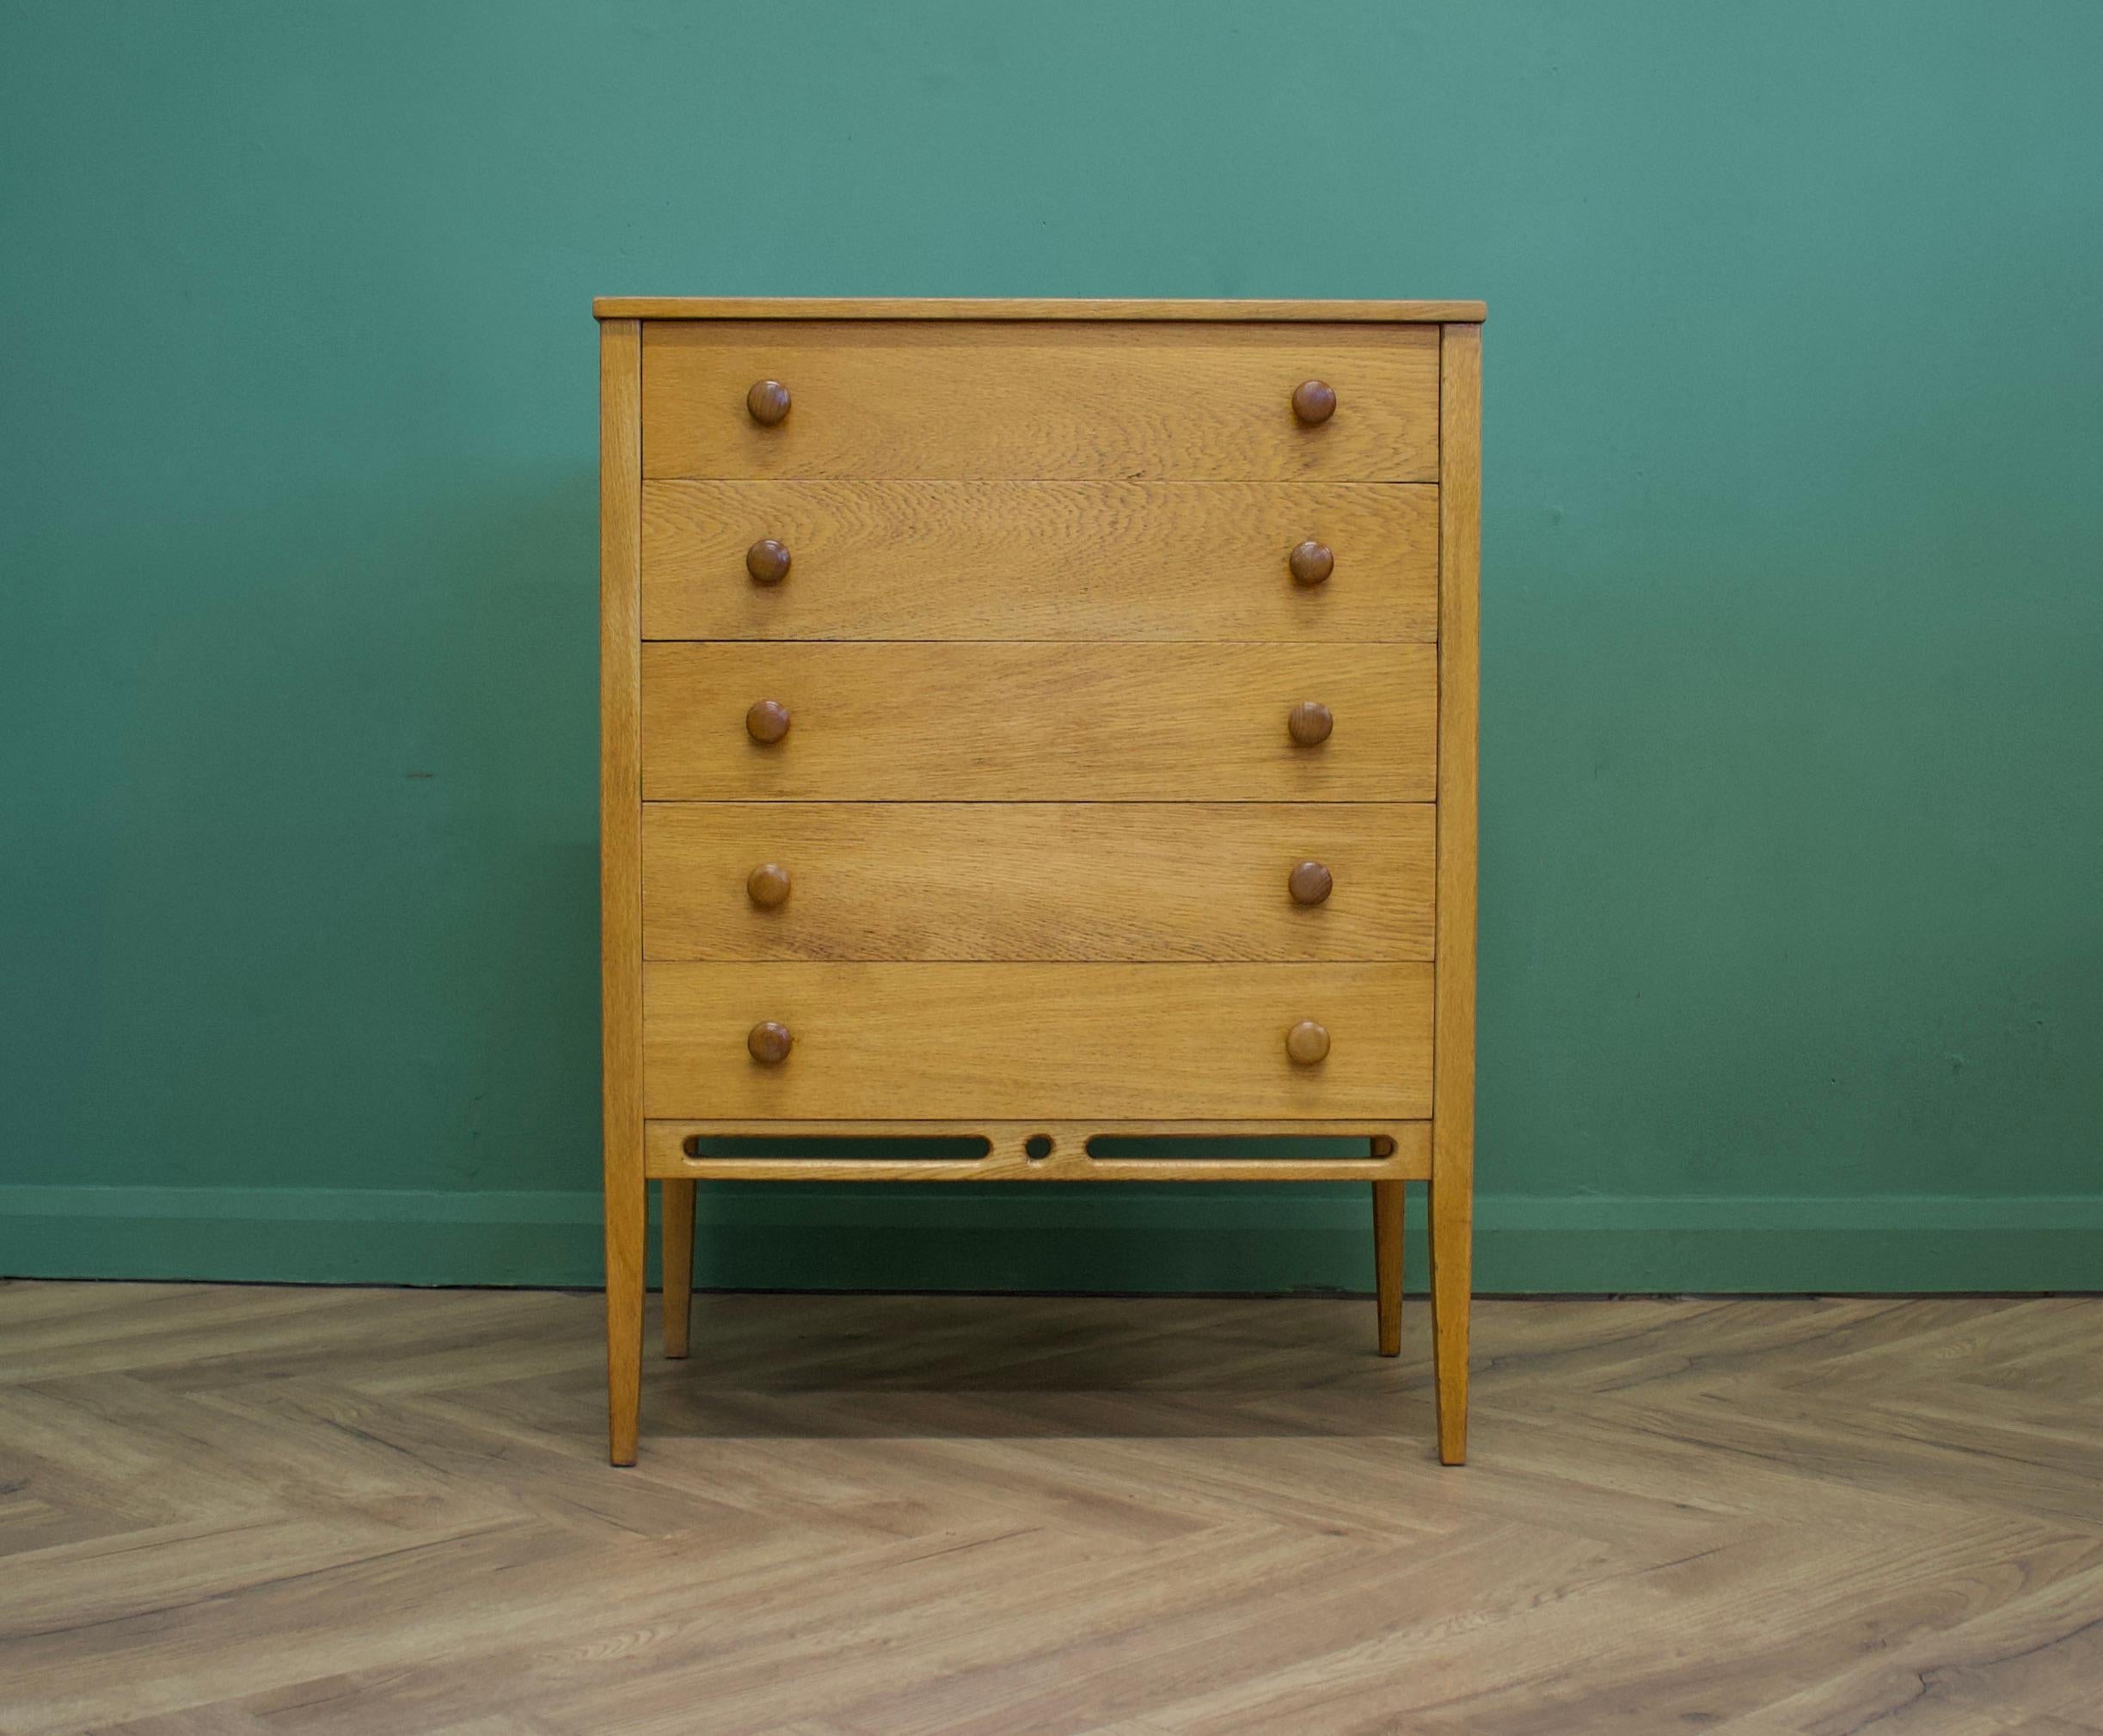 - Midcentury chest of drawers.
- Designed by John Herbert.
- Manufactured in the UK by Younger.
- Made from oak and oak veneer.